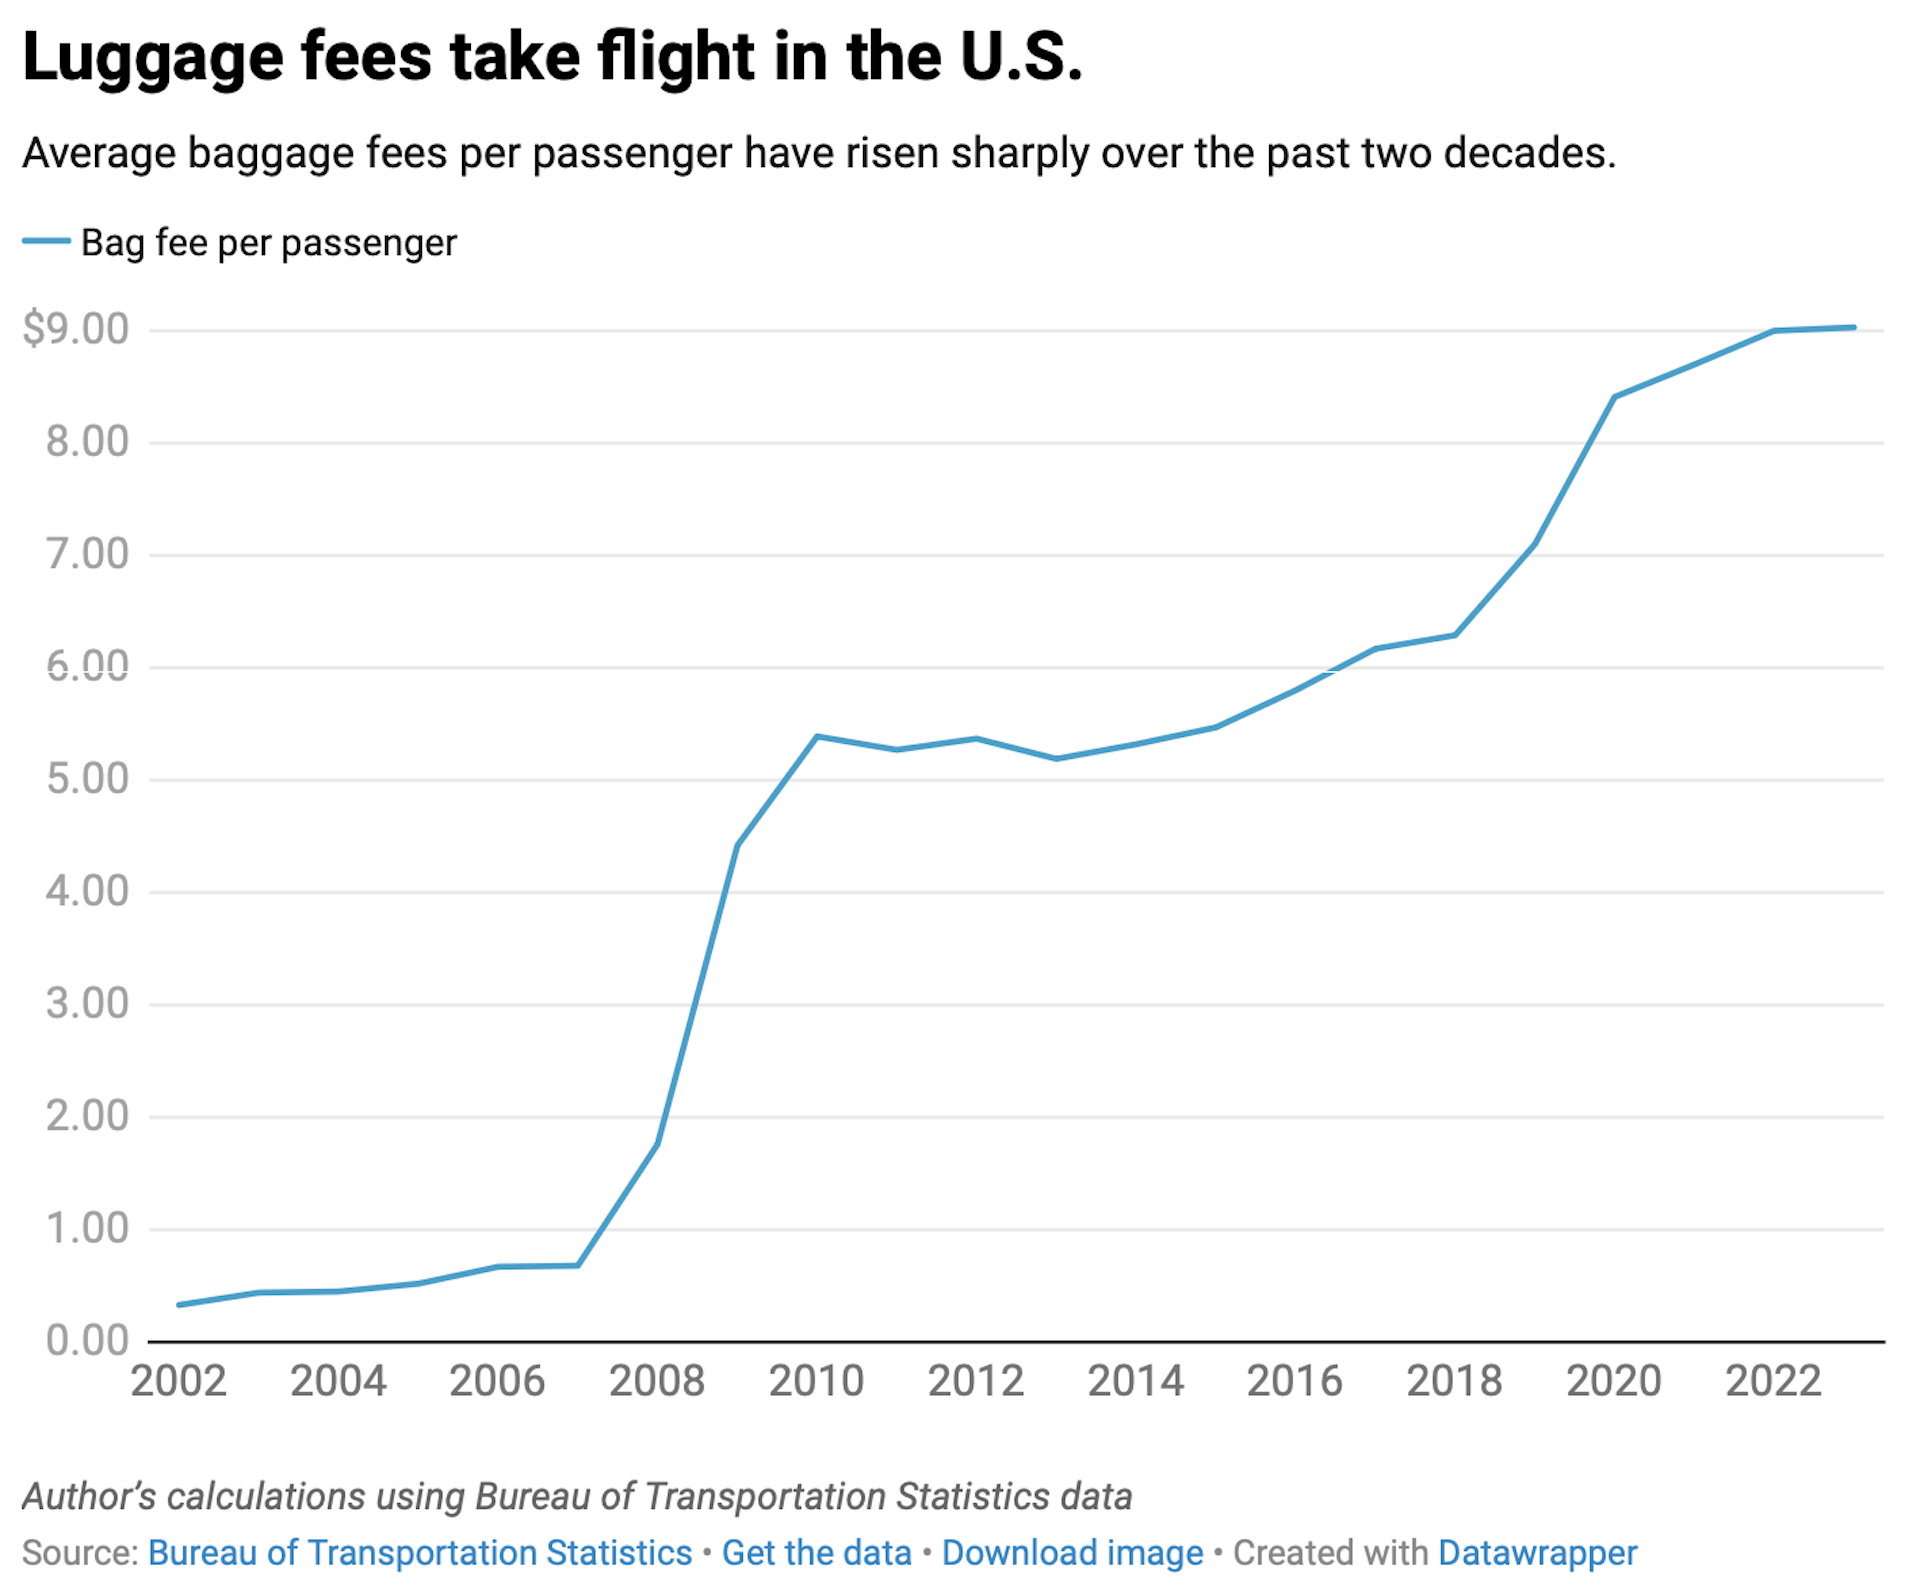 A line chart shows that average baggage fees per passenger have risen sharply in the U.S. over the past two decades.